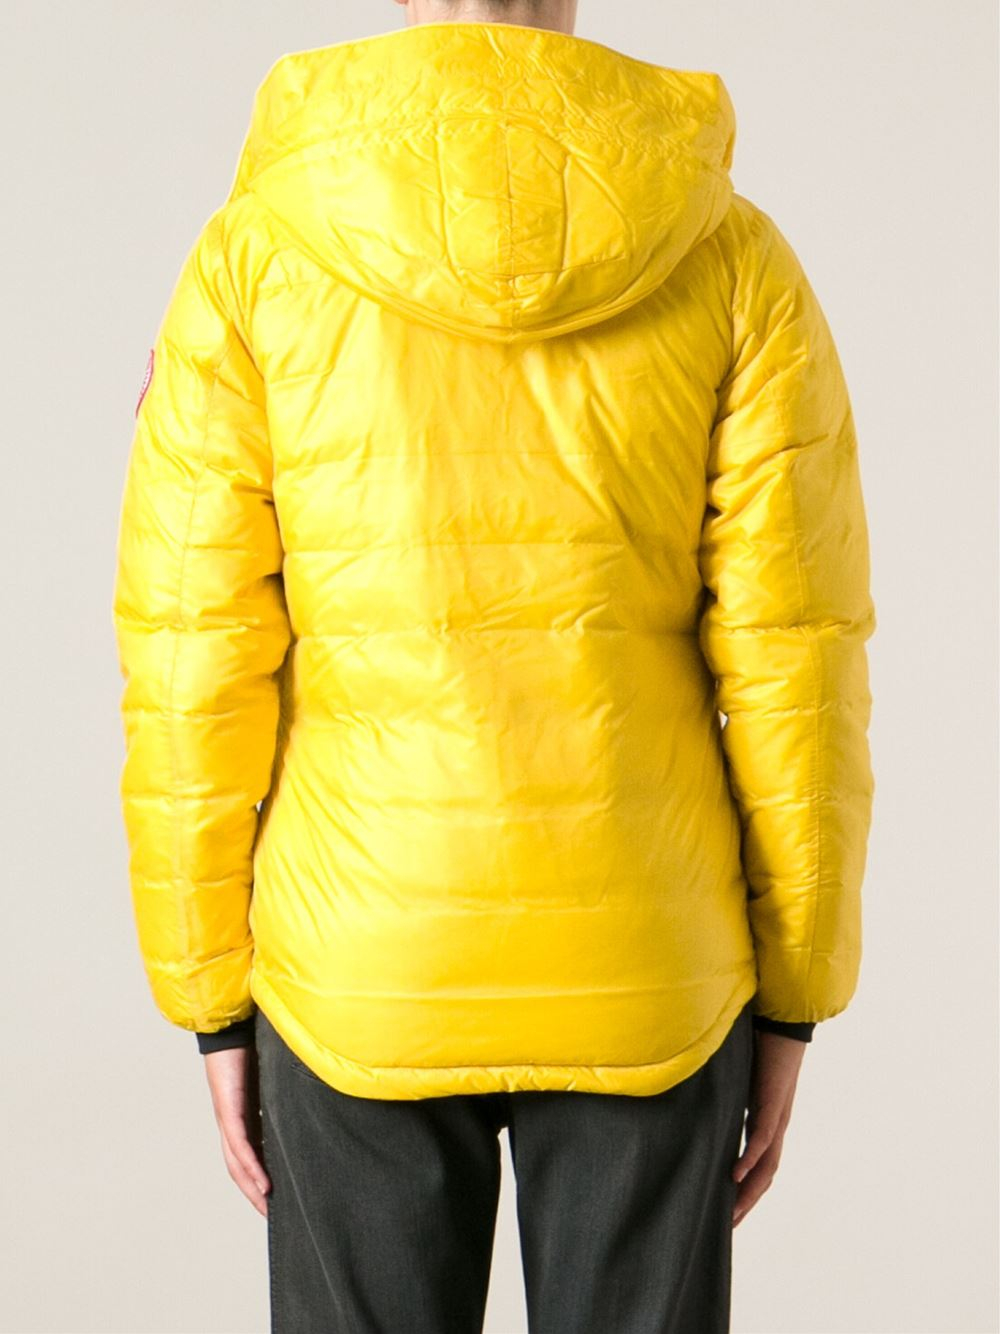 Canada Goose victoria parka outlet fake - Canada goose 'camp Hoody' Padded Coat in Yellow (yellow & orange ...